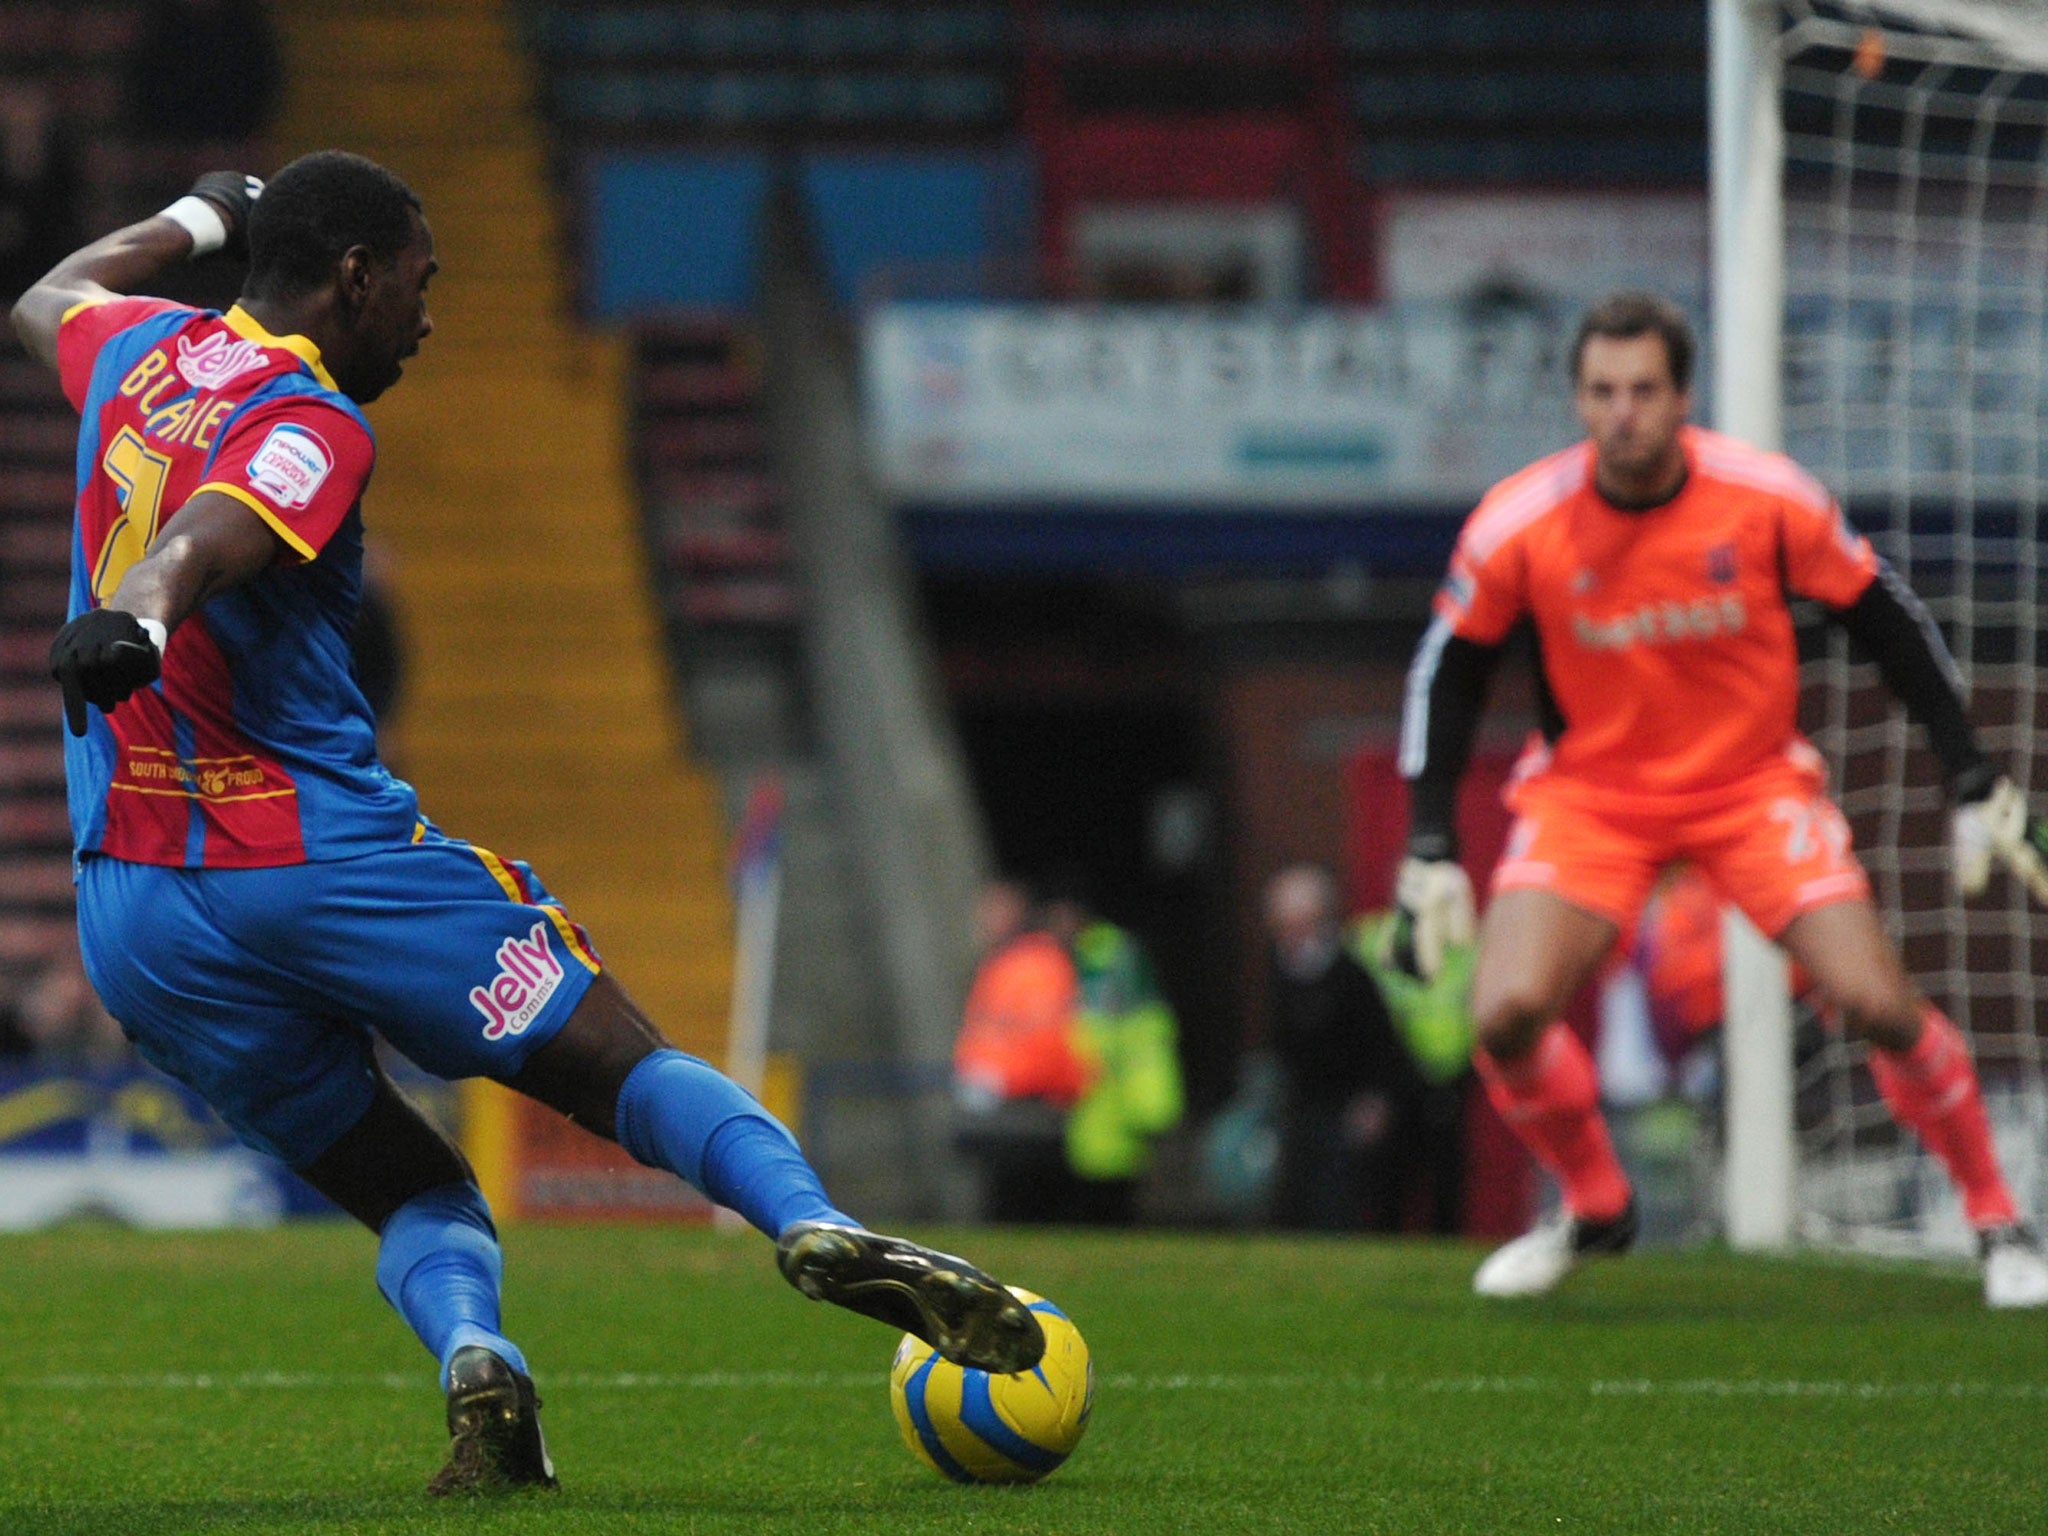 Crystal Palace's English midfielder Yannick Bolasie (L) shoots